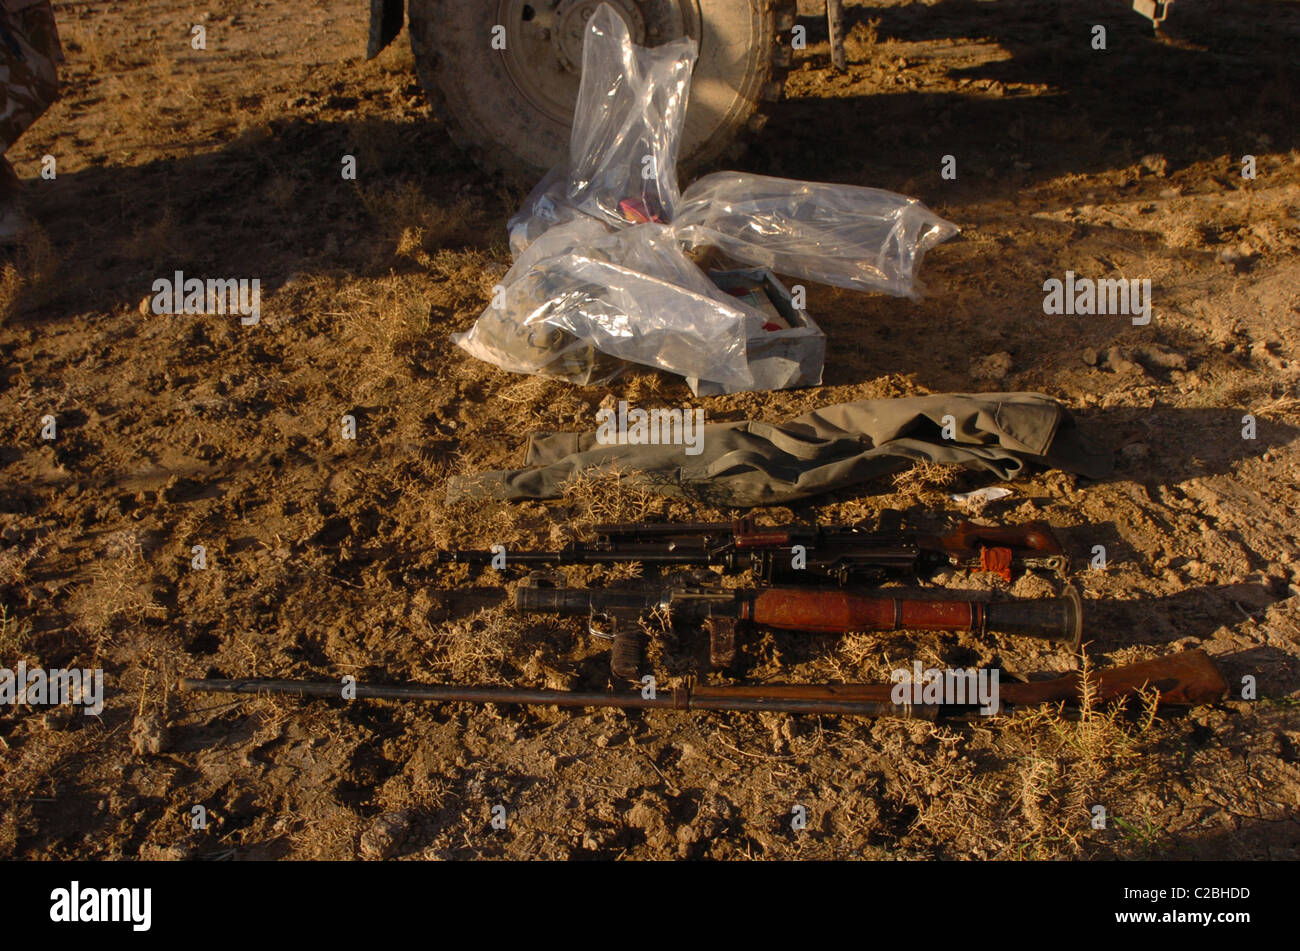 Weapons fined in Iraq by the welsh guards Battel group, some wer in the marsh lands on the border with Iran Stock Photo